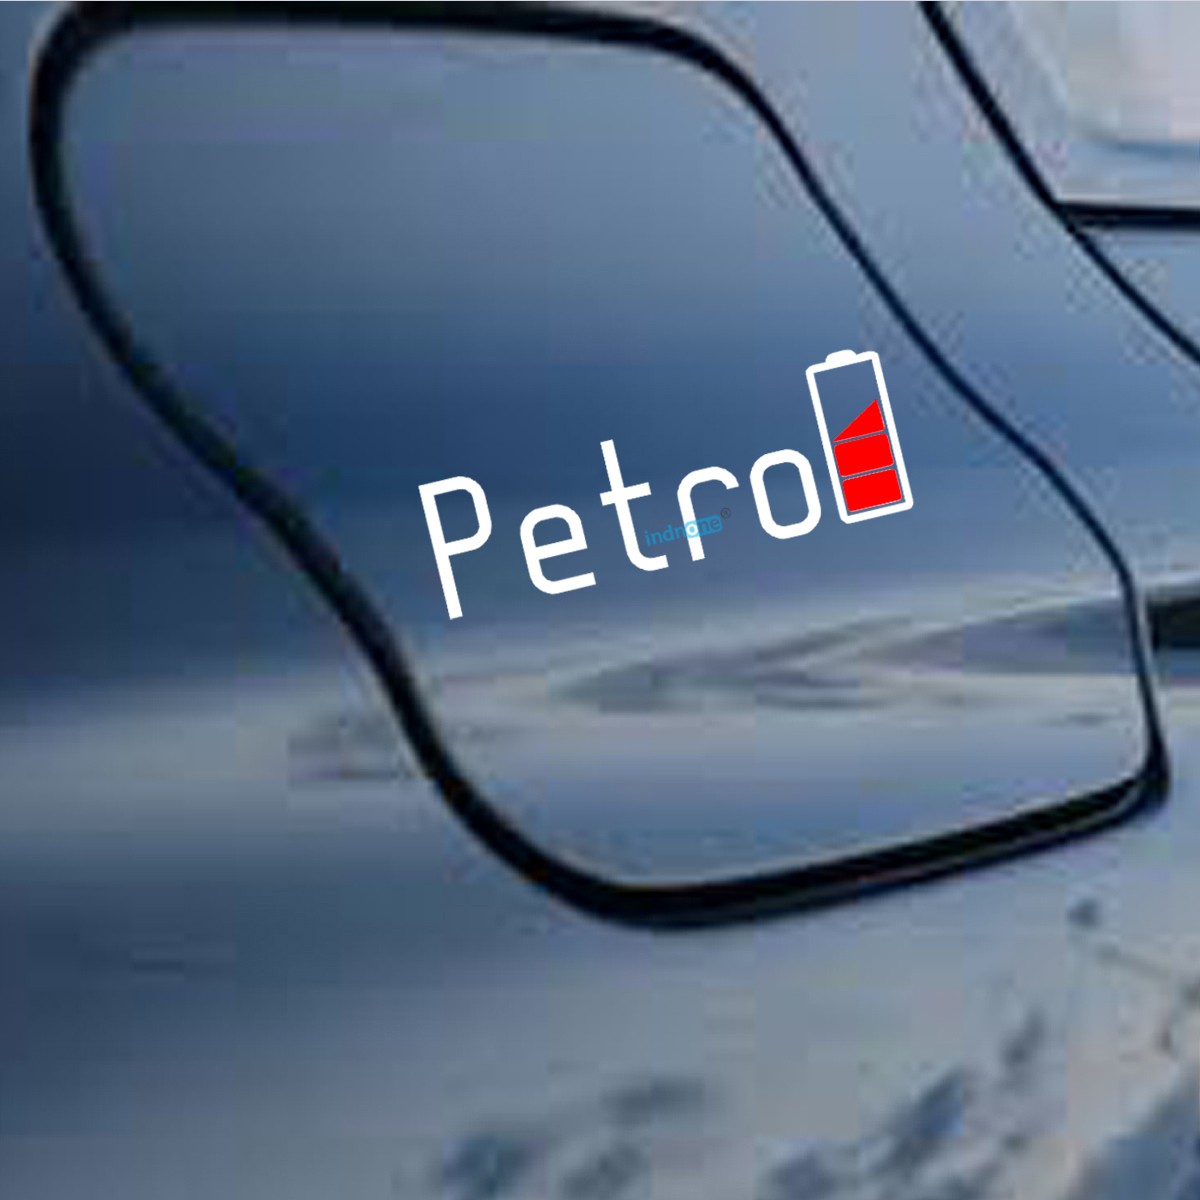 Buy indnone® Petrol Paip Car Stylish Sticker Online - White - Standard Size  - FirstHub